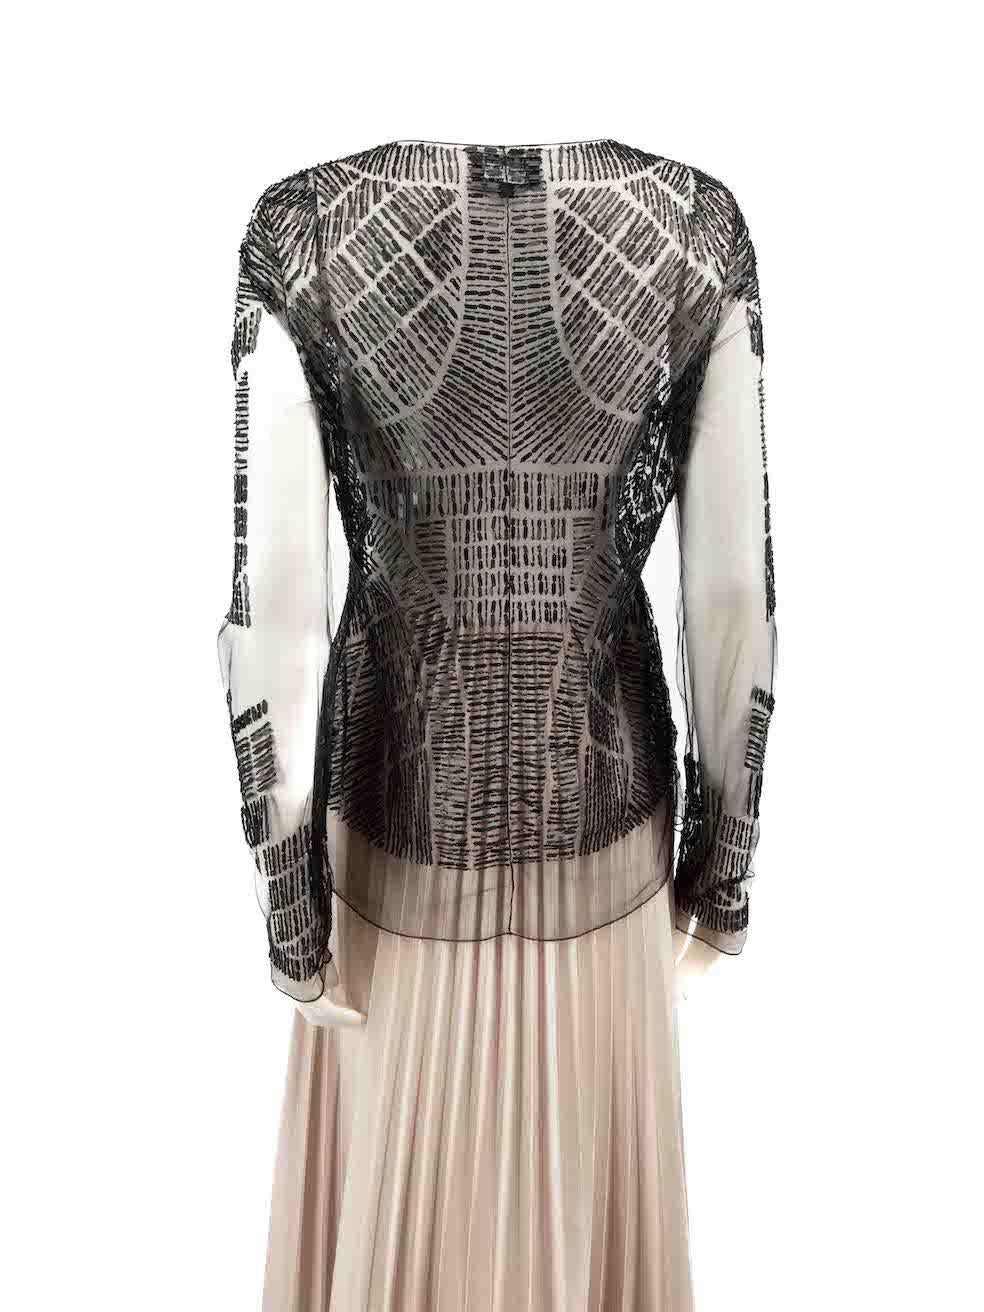 J.Mendel Black Tulle W Tribal Beading Sheer Top Size M In Good Condition For Sale In London, GB